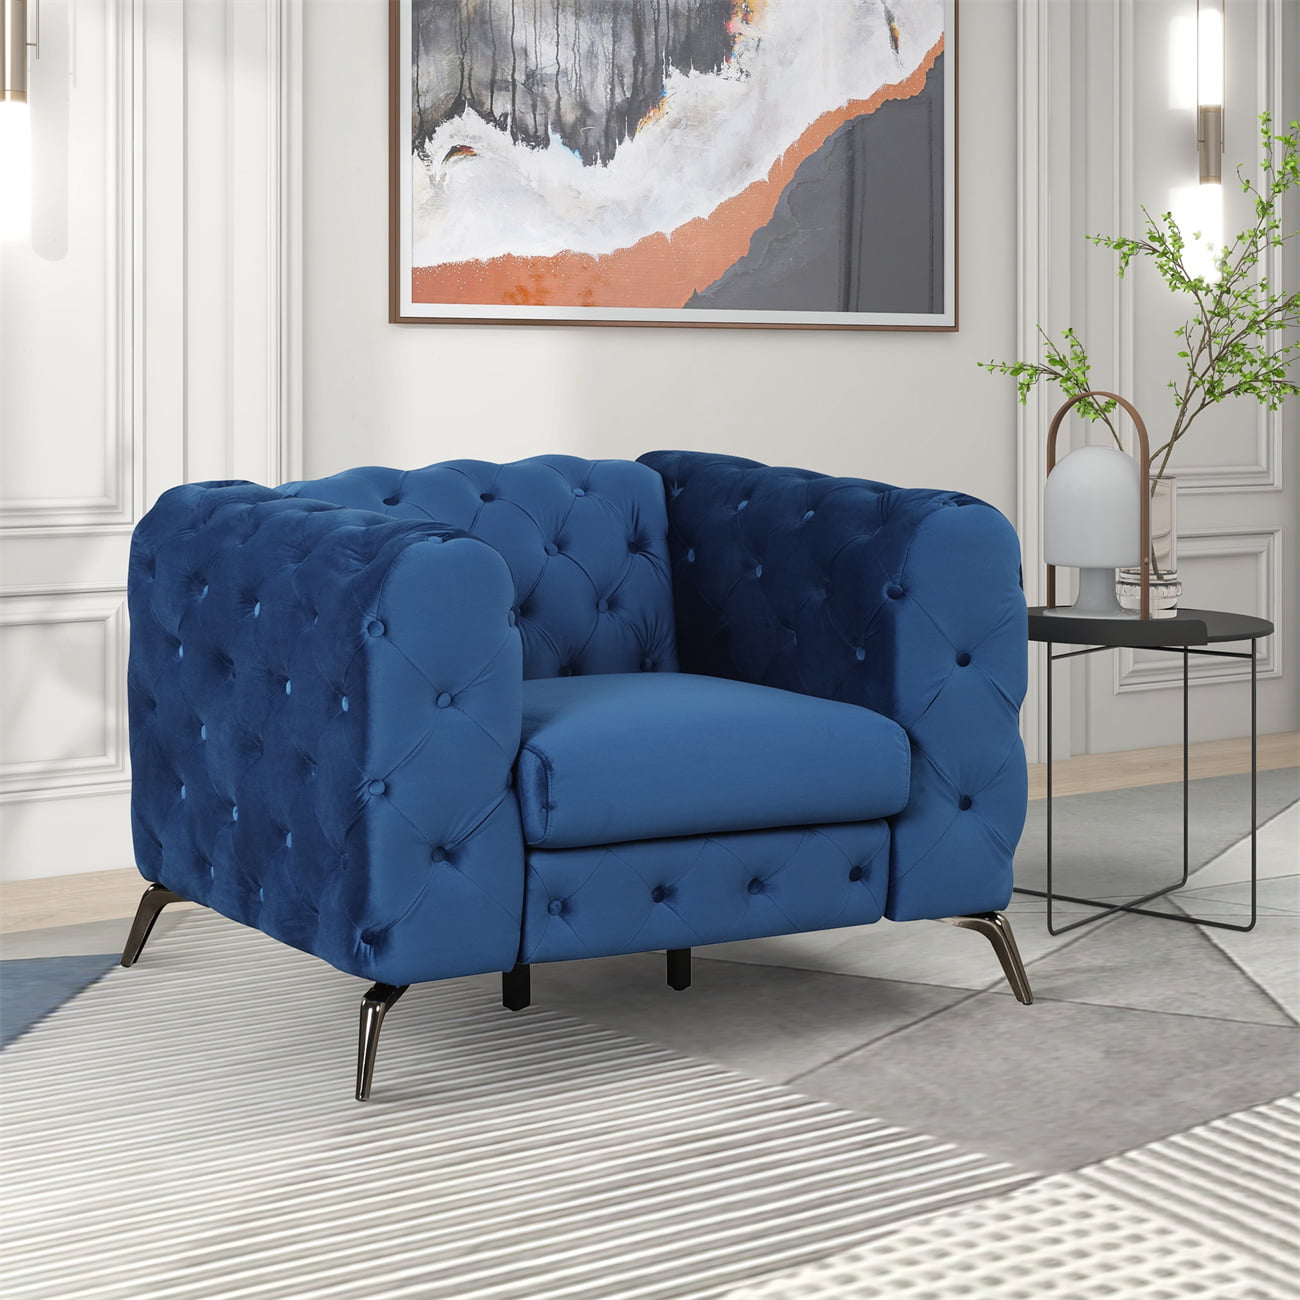 Insert Included, Decorative Throw, Accent, Sofa, Couch, Bedroom, Polyester  Blue, Modern, 1 - Ralphs